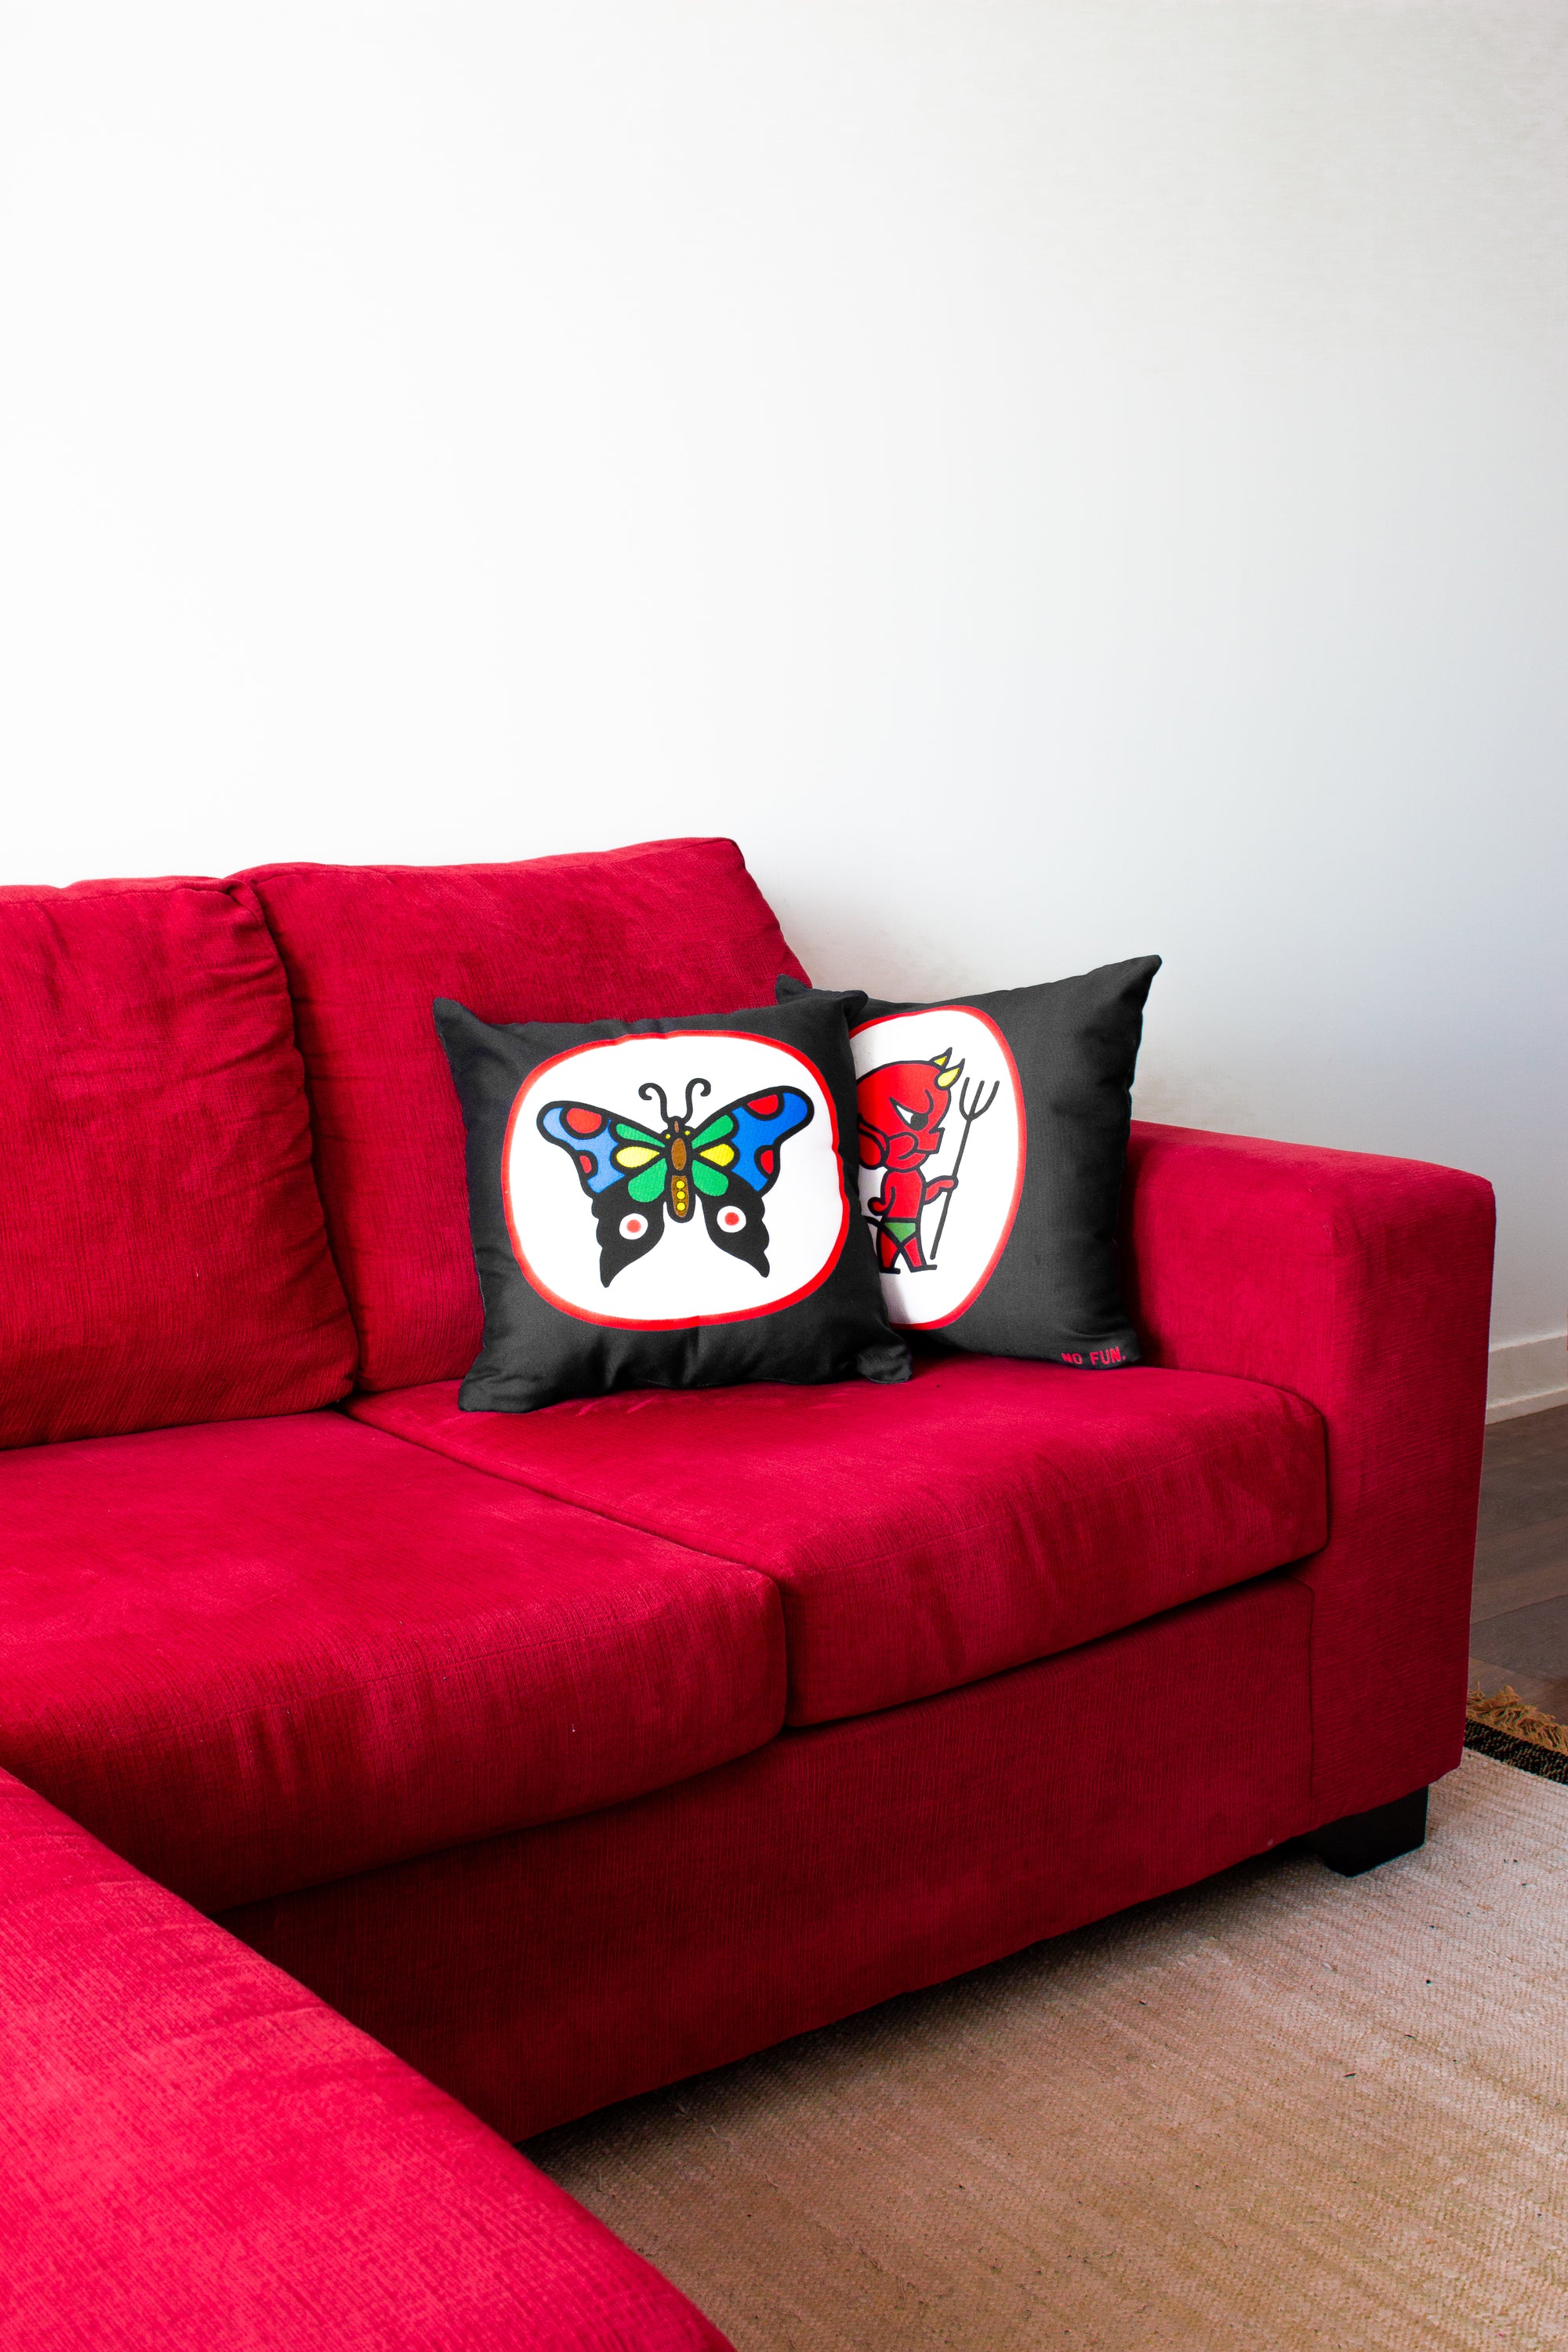 The "Devil & Black Widow" Pillow on a red couch.  The room is white, with brown wood floor. 